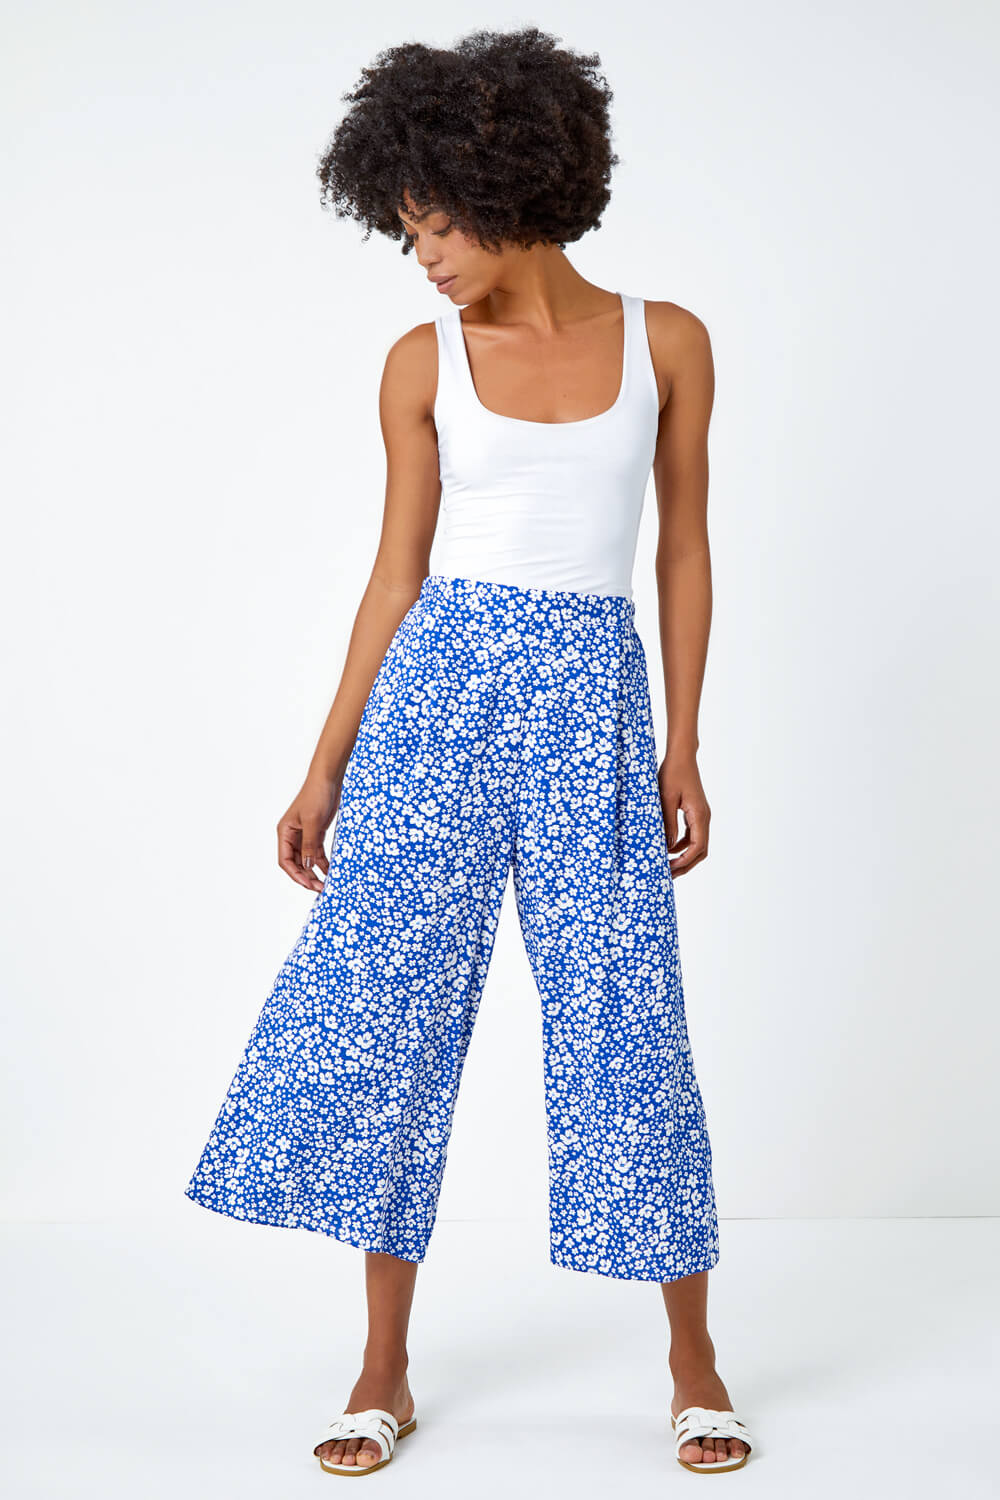 Blue Ditsy Floral Print Culotte Trousers, Image 2 of 5